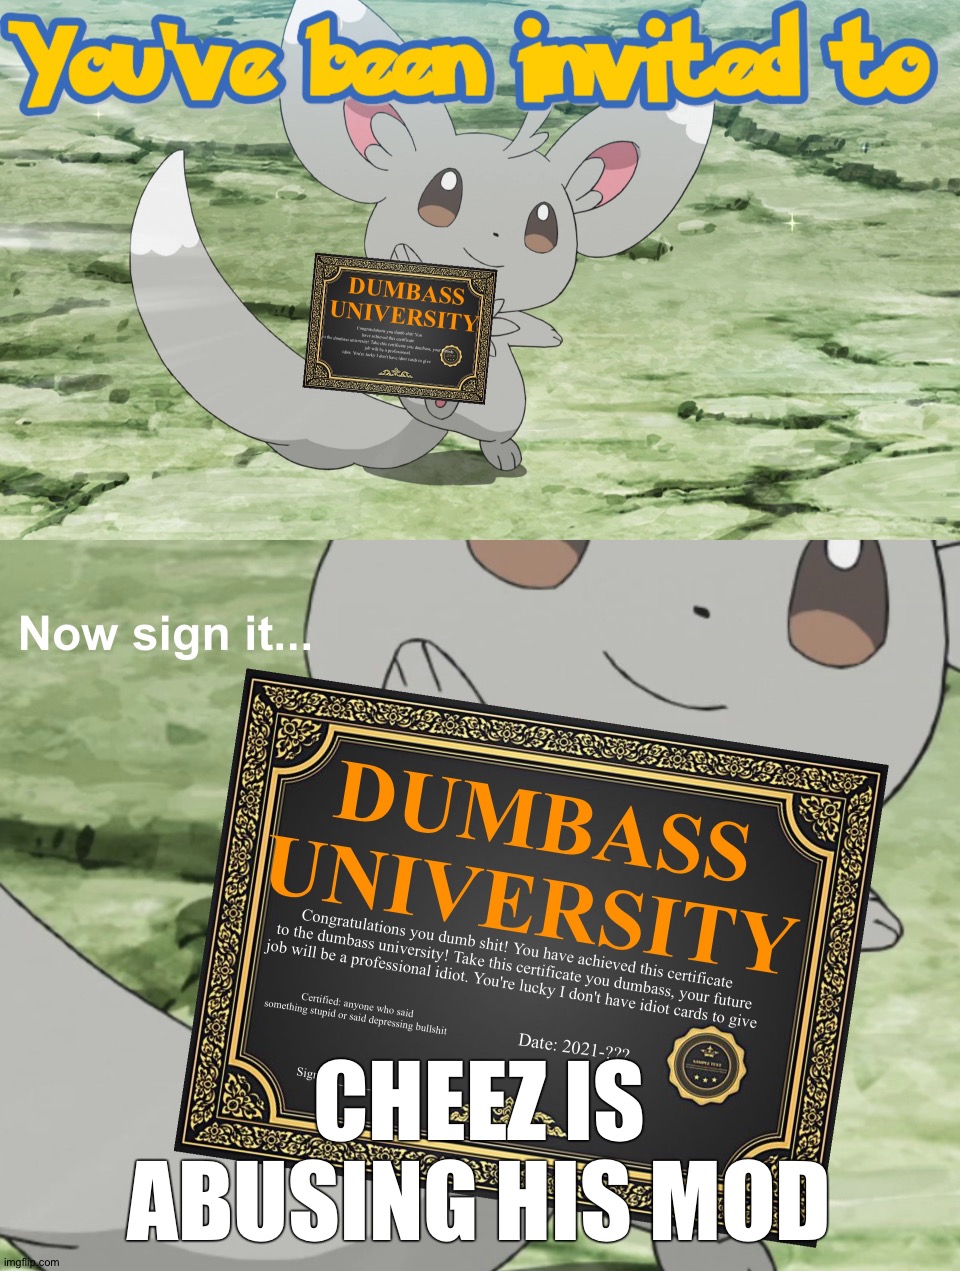 He/she disapproved the wrong images | CHEEZ IS ABUSING HIS MOD | image tagged in you've been invited to dumbass university | made w/ Imgflip meme maker